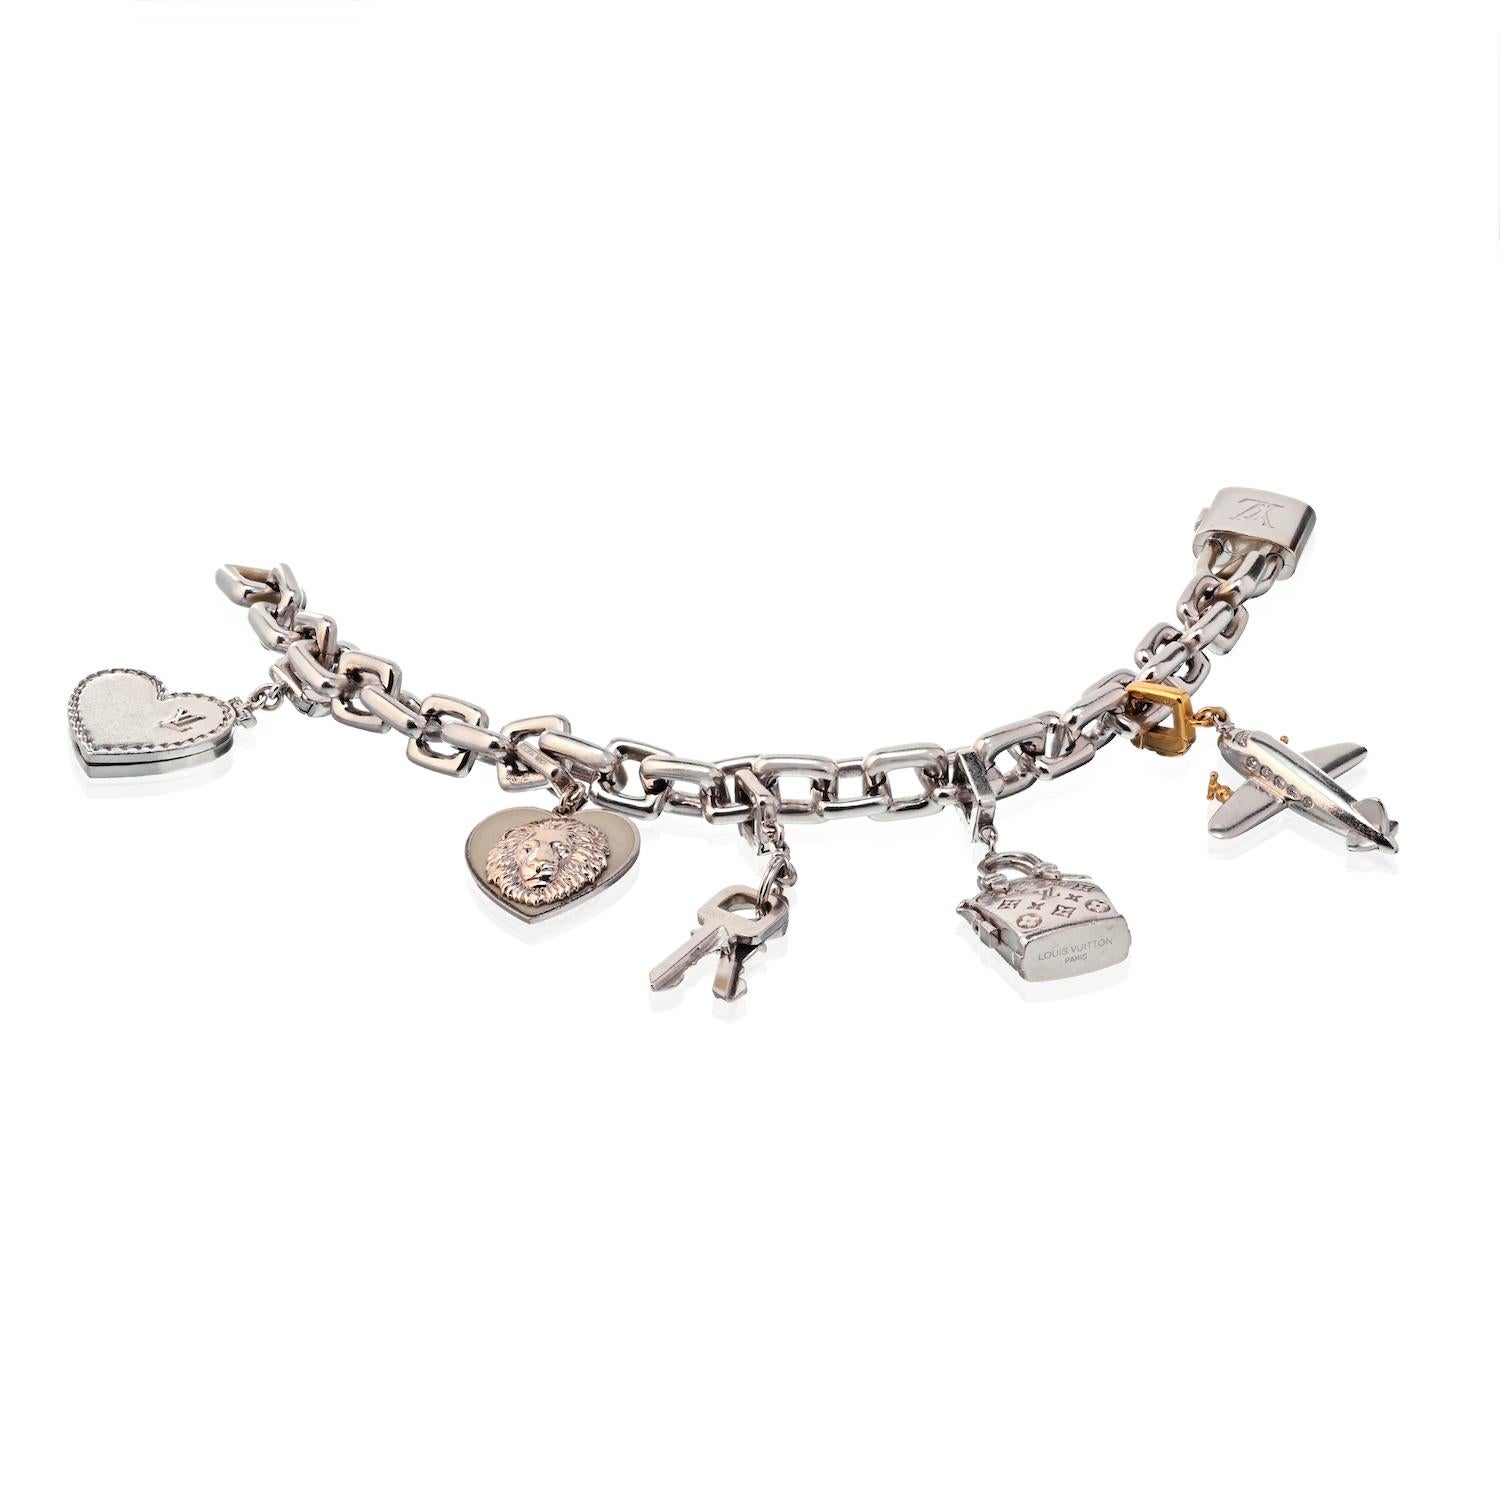 The Lockit bracelet suspends six removable charms featuring a plane, heart, podlock, keys, lion and a purse, enhanced by a round-cut sapphire, set in 18k white and yellow gold; all marked LV for Louis Vuitton with French hallmarks. 
Gross weight of